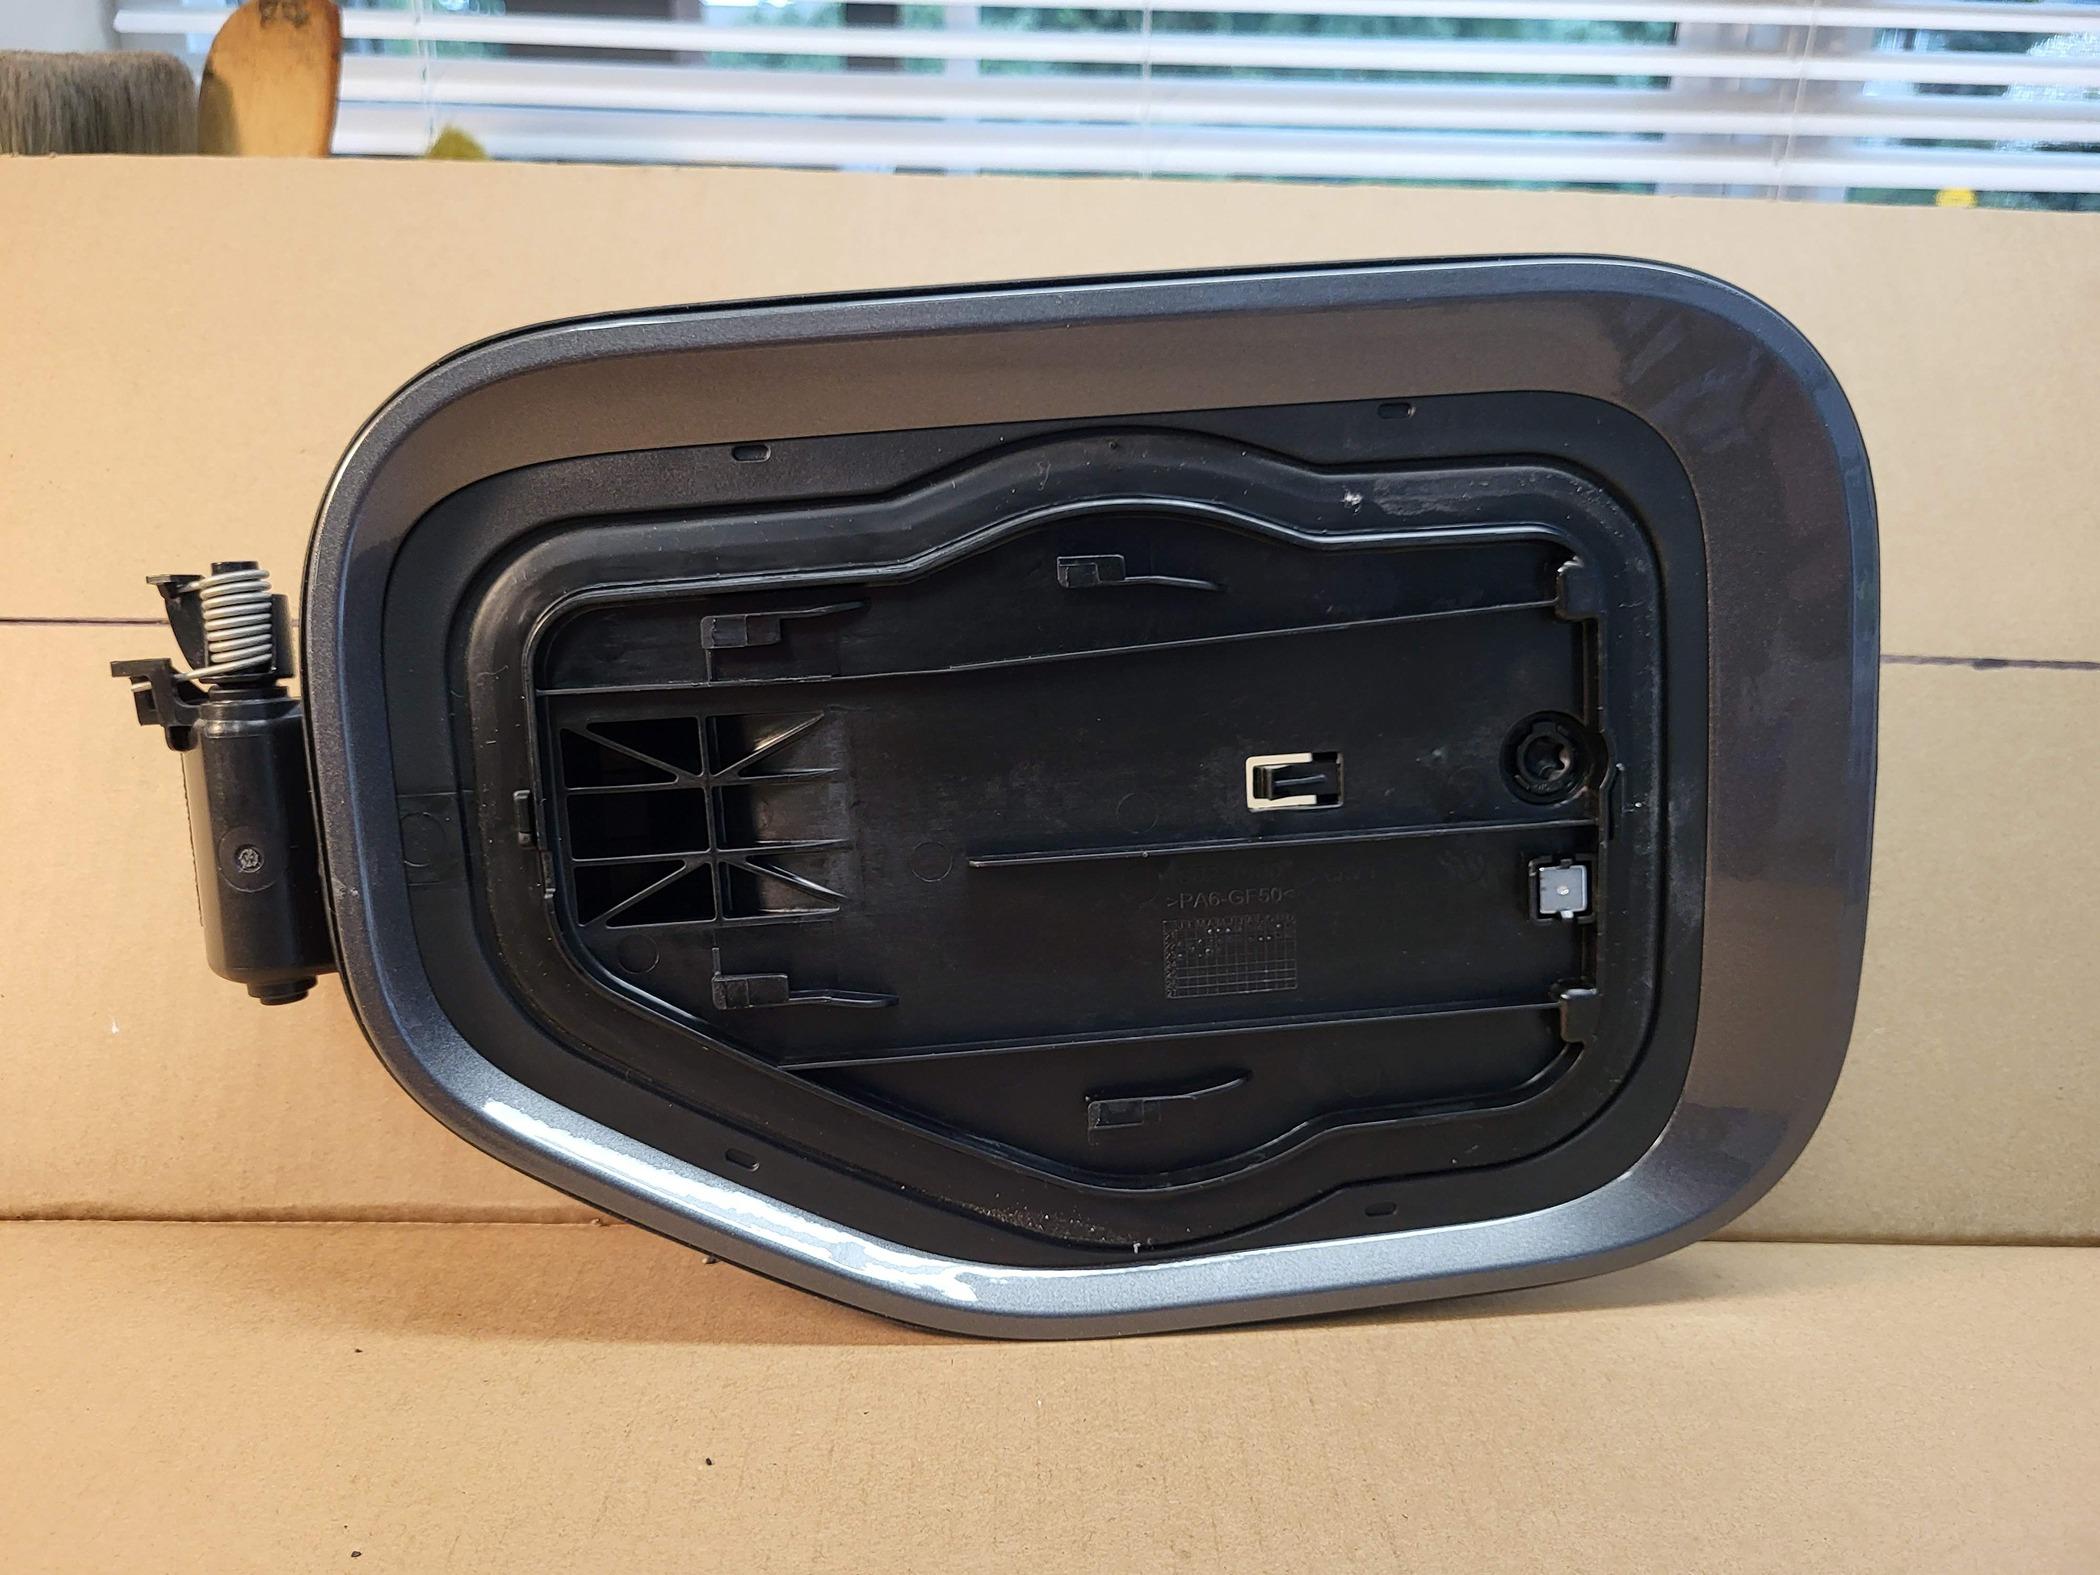 Ford F-150 Lightning Charge port door for sale without cover plate $125 20240327_101750